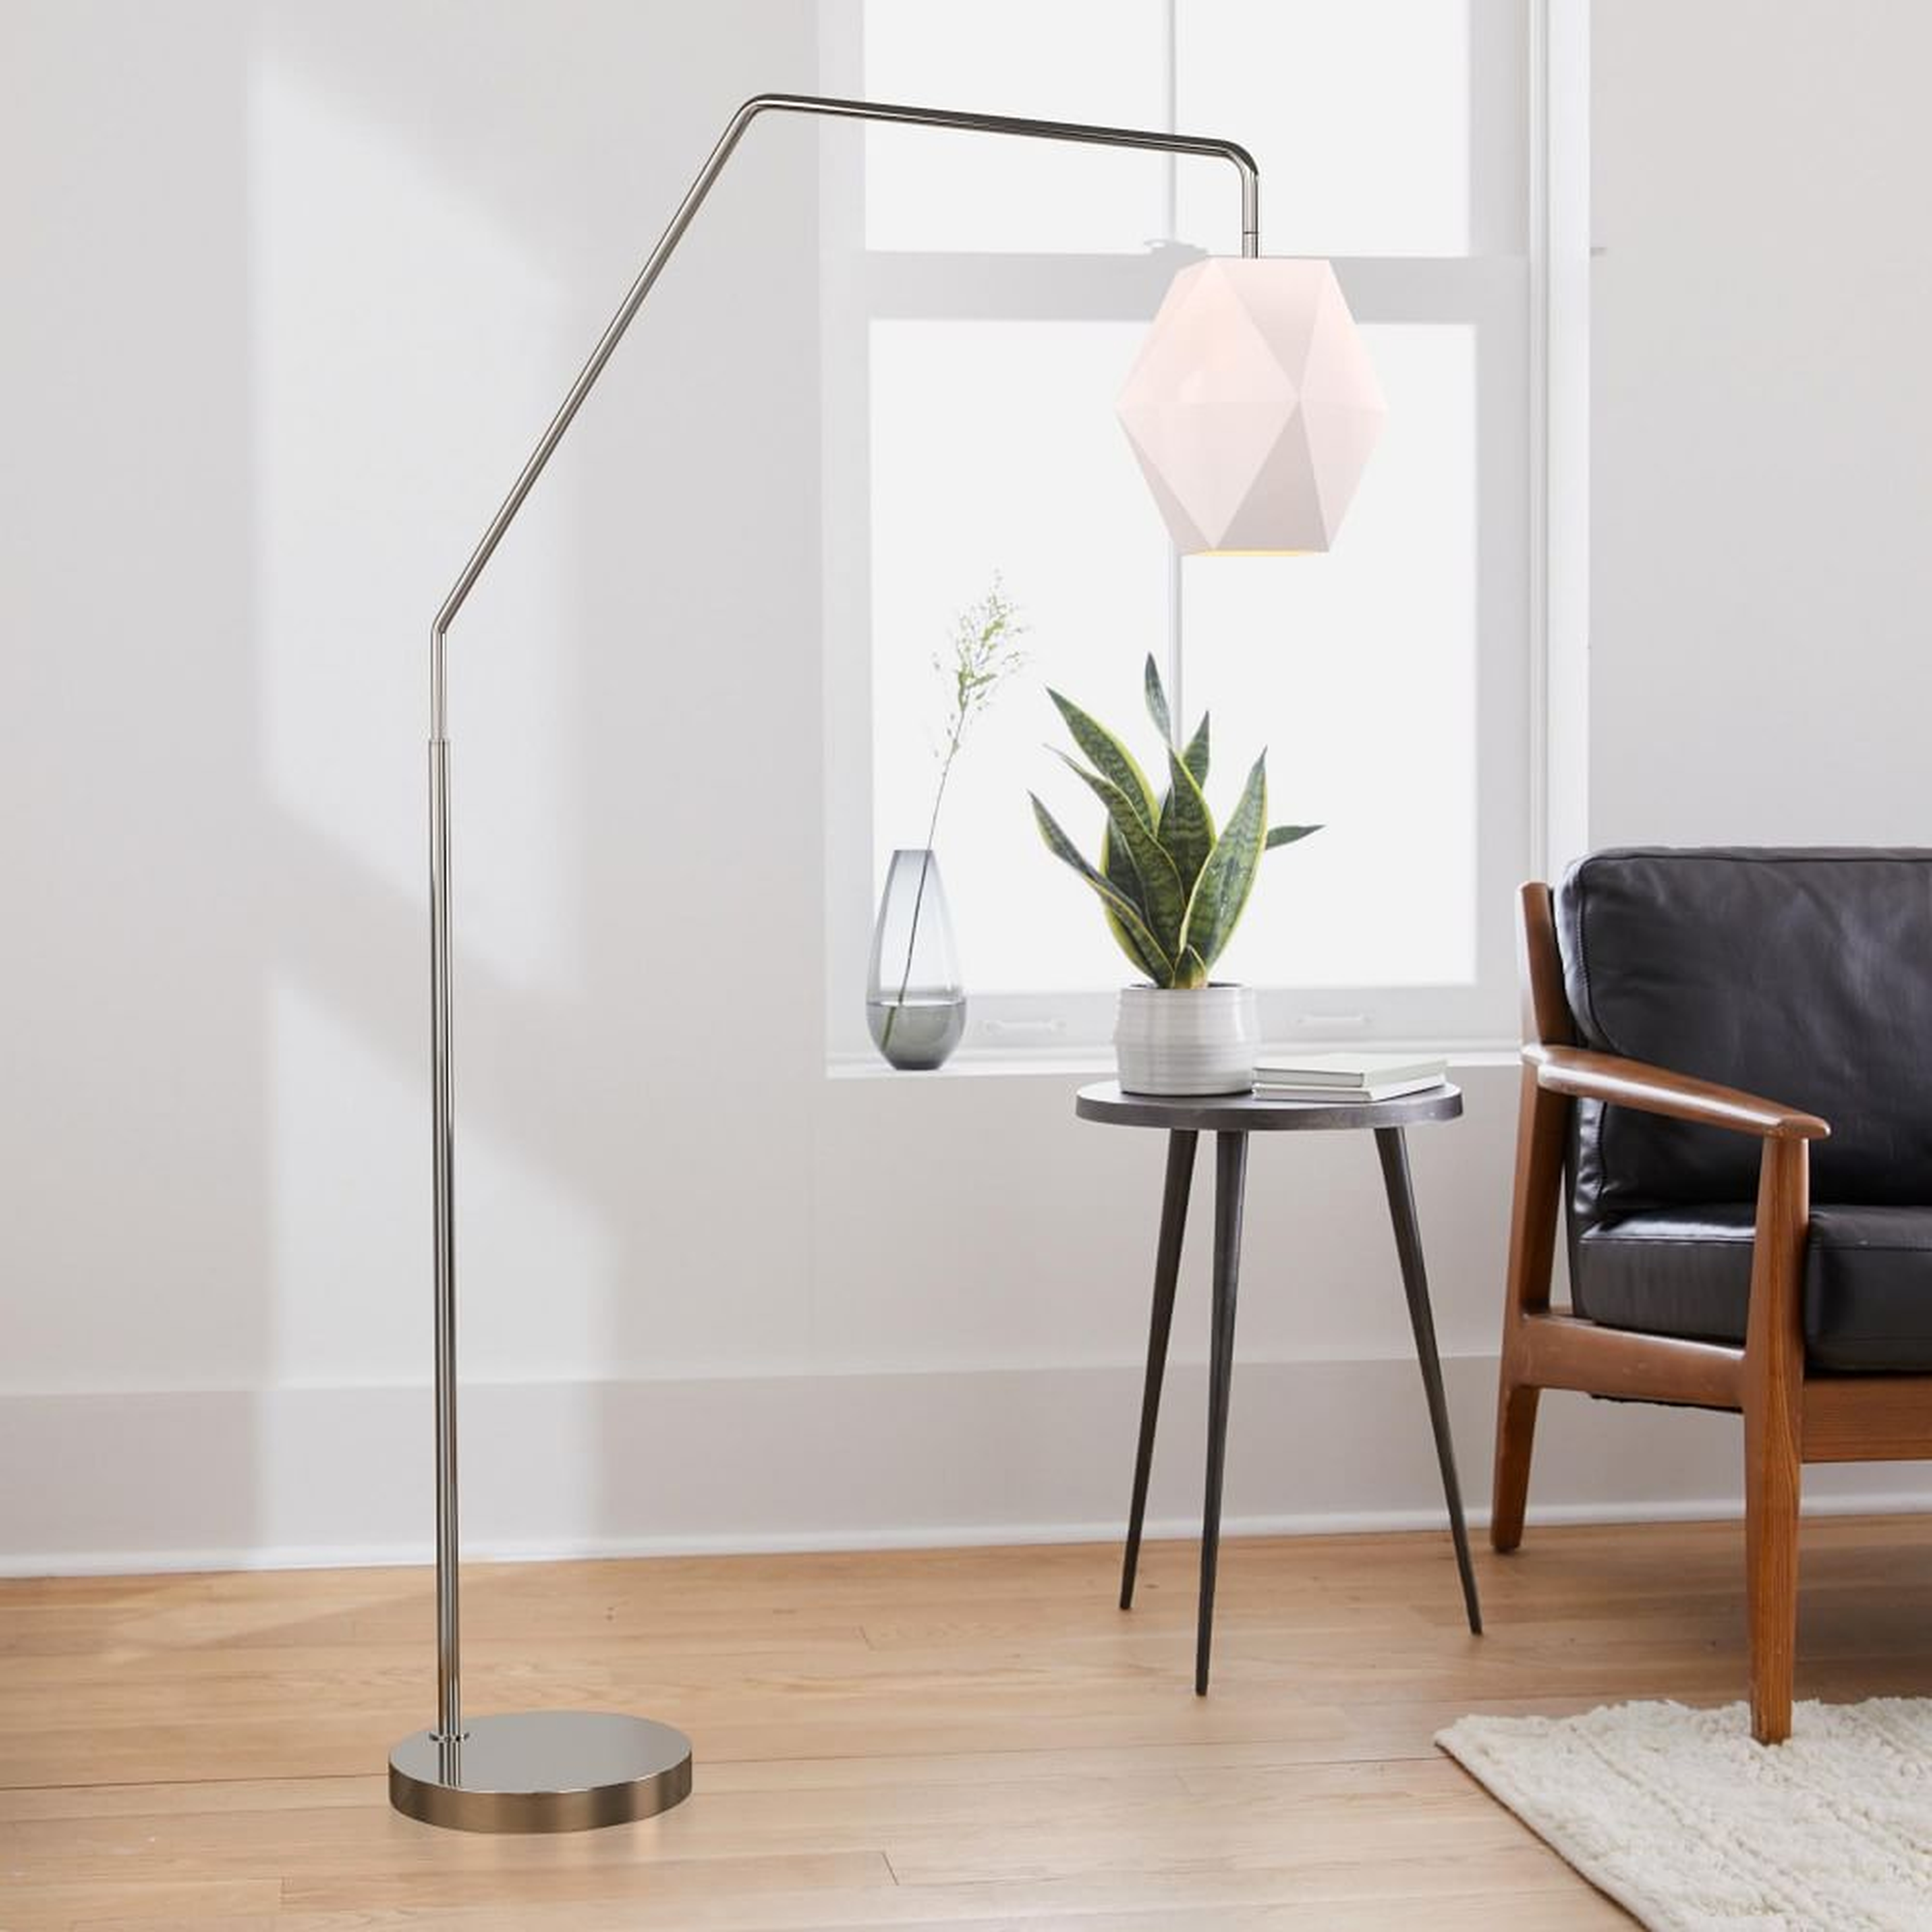 Sculptural Overarching Floor Lamp, Faceted Small, Milk, Polished Nickel, 11.5" - West Elm